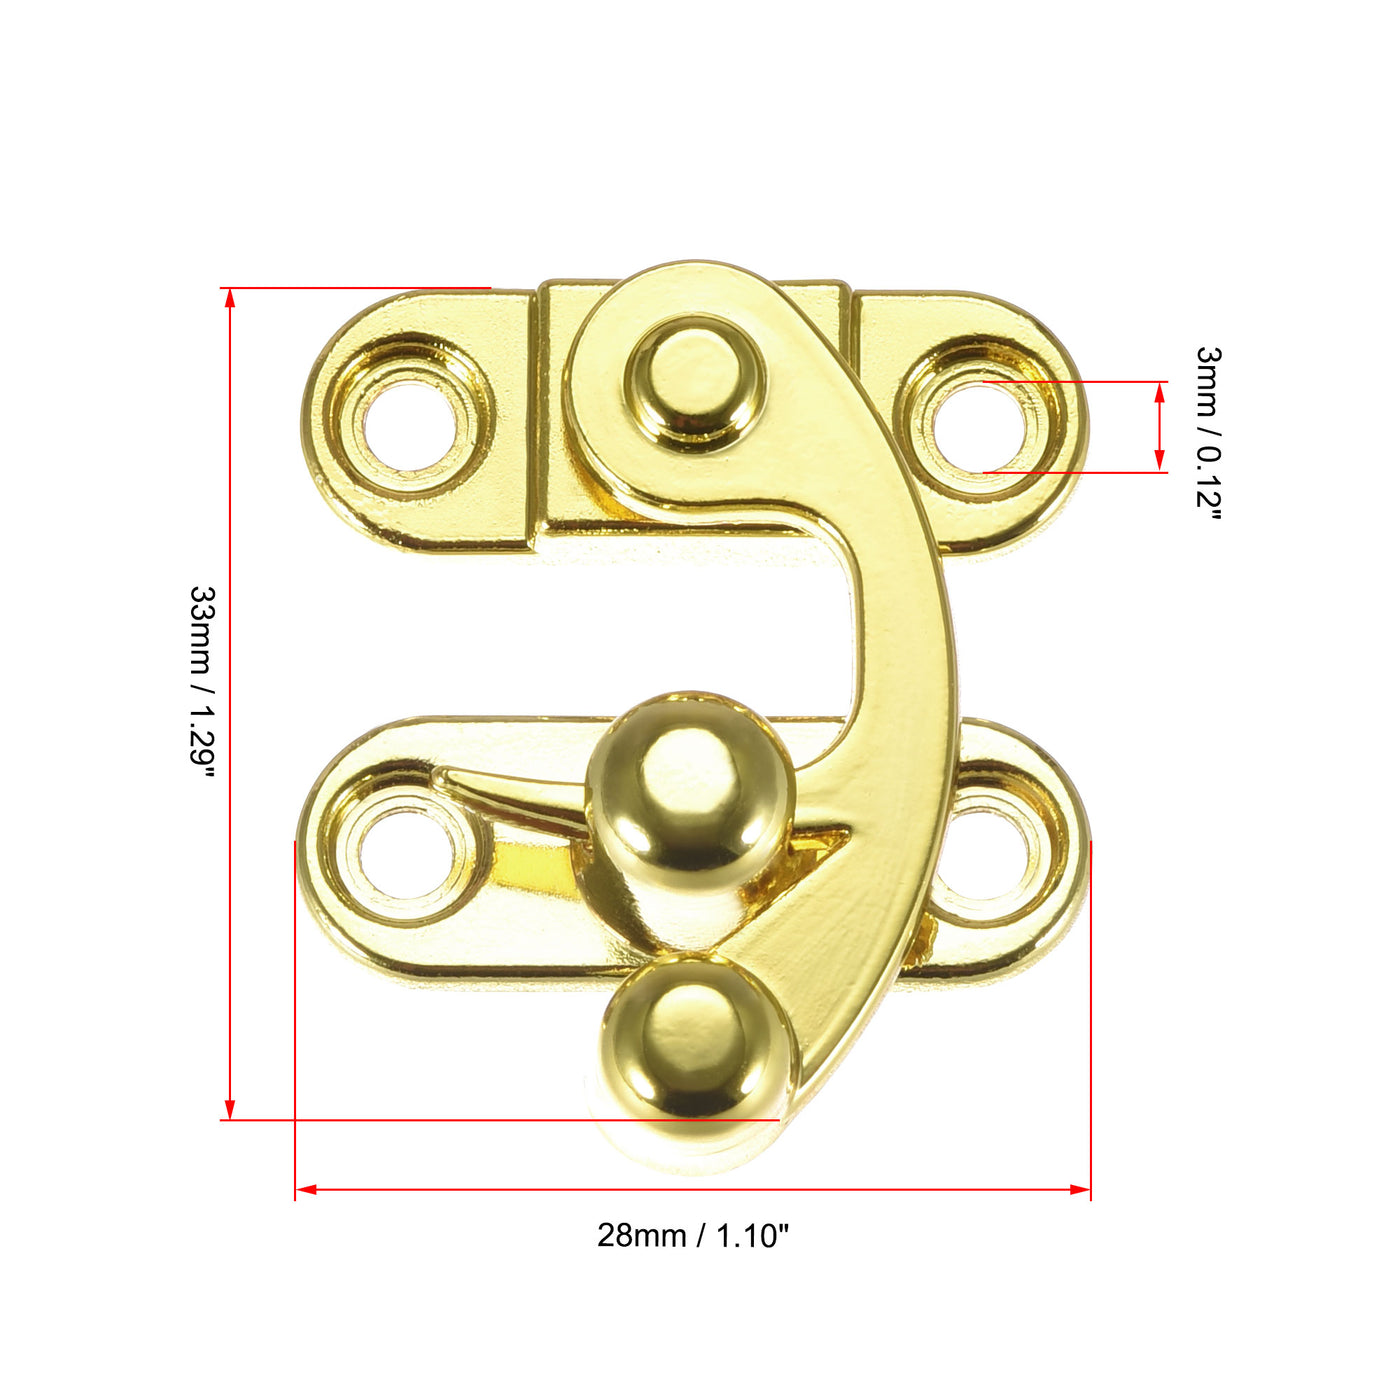 uxcell Uxcell Antique Vintage Lock Clasp Right Latch Hook Hasp 33mmx28mm Swing Arm Latch Gold Tone 5 Pcs